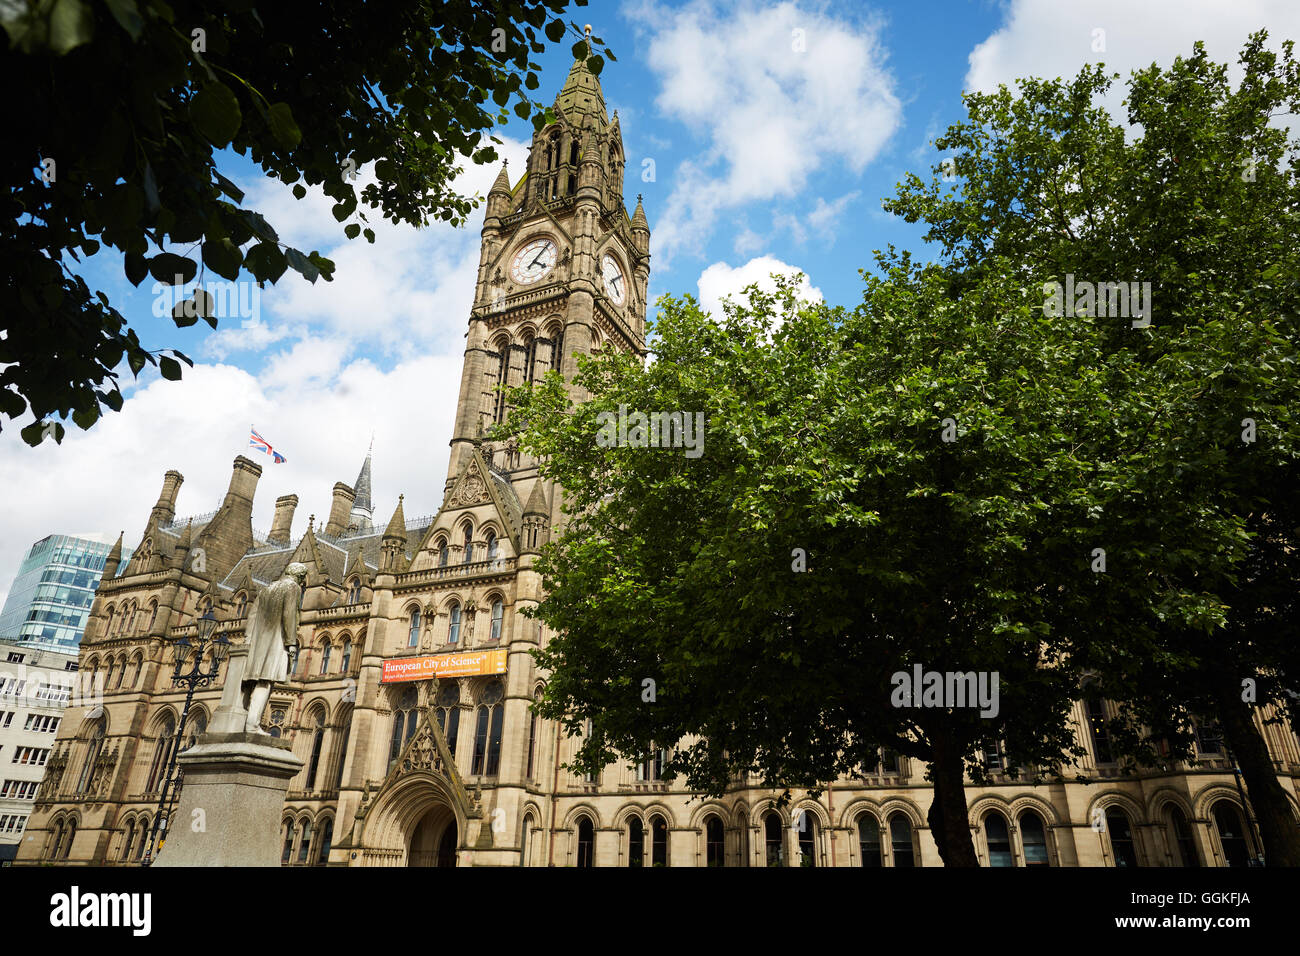 Manchester town hall Albert square    Architect  property properties building development structure property architectural desig Stock Photo